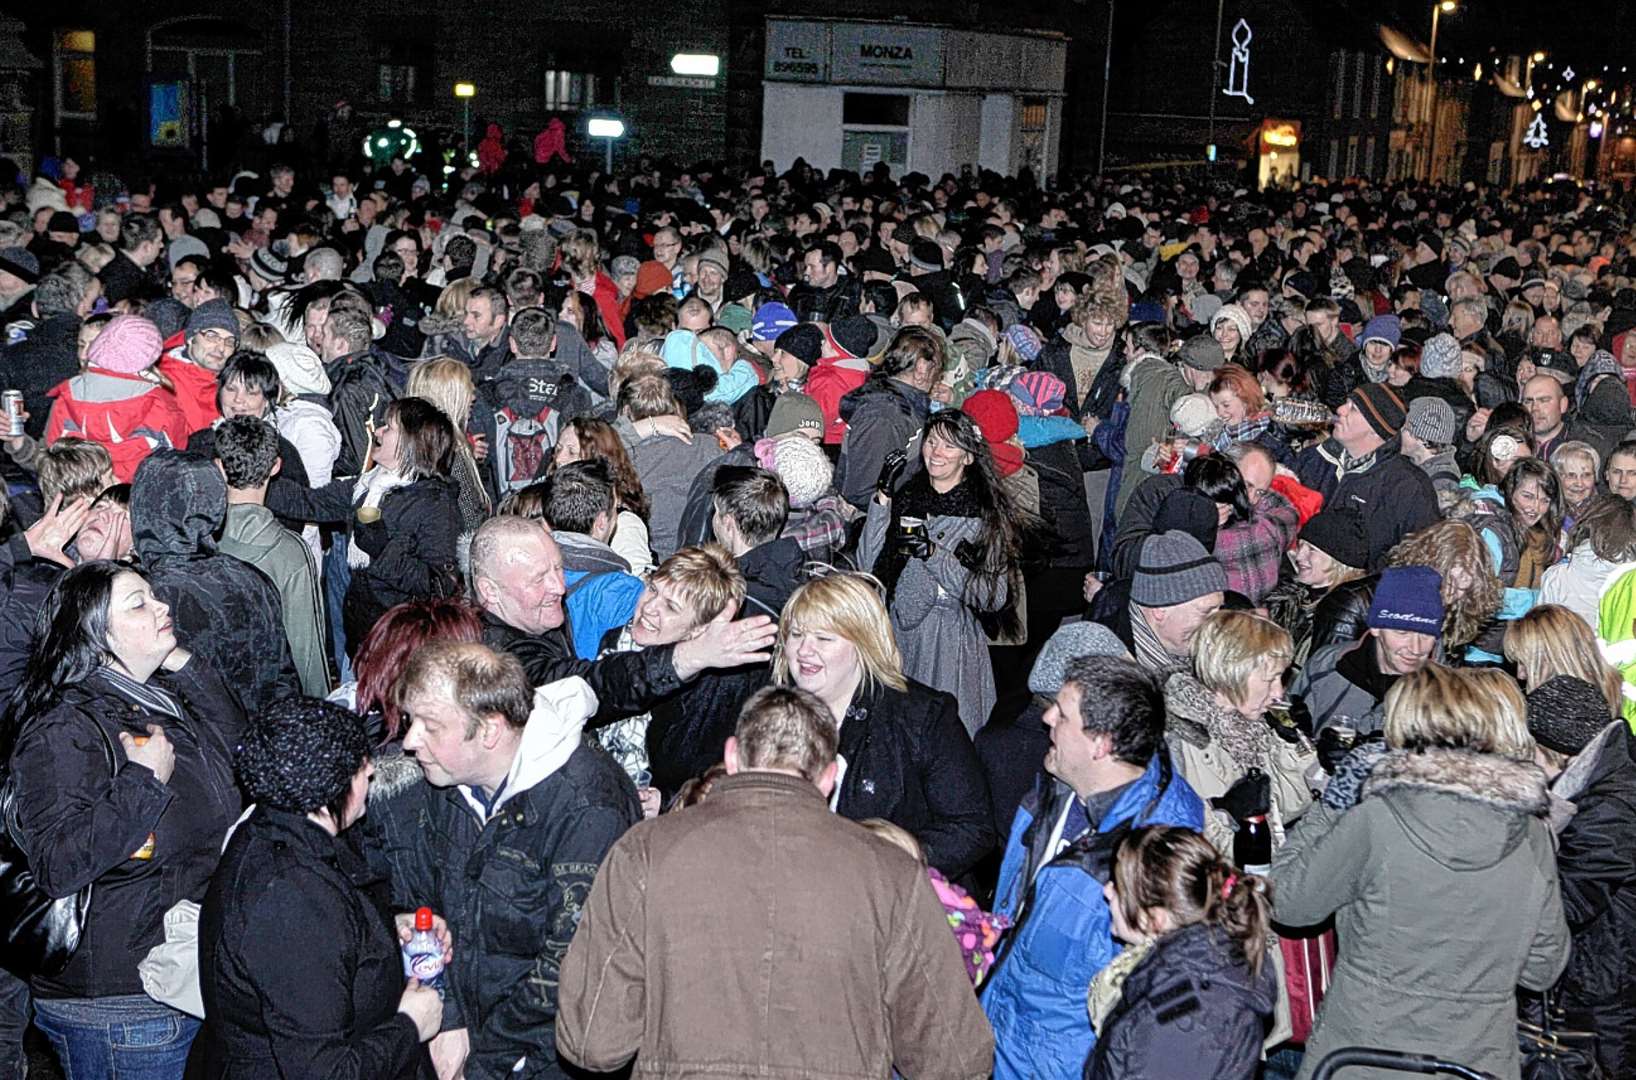 Thousands turned out for Thurso’s street party on Hogmanay 2010 as it made a comeback after the cancellation of the previous year's event. Picture: John Baikie